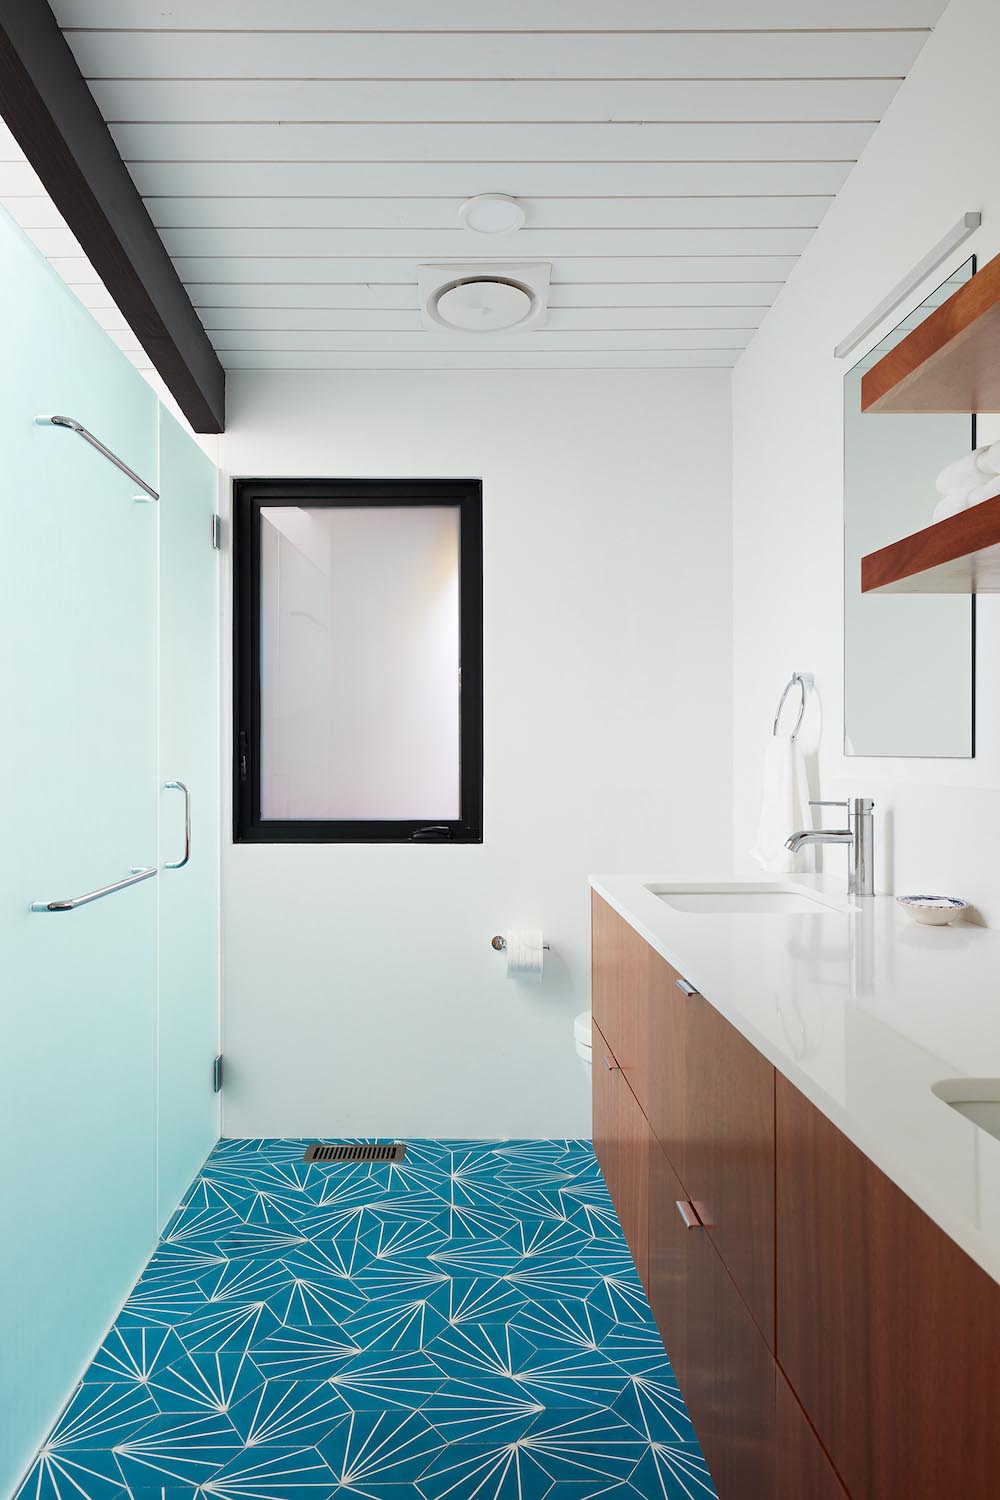 A modern white bathroom with blue starburst tiles and a wood vanity.